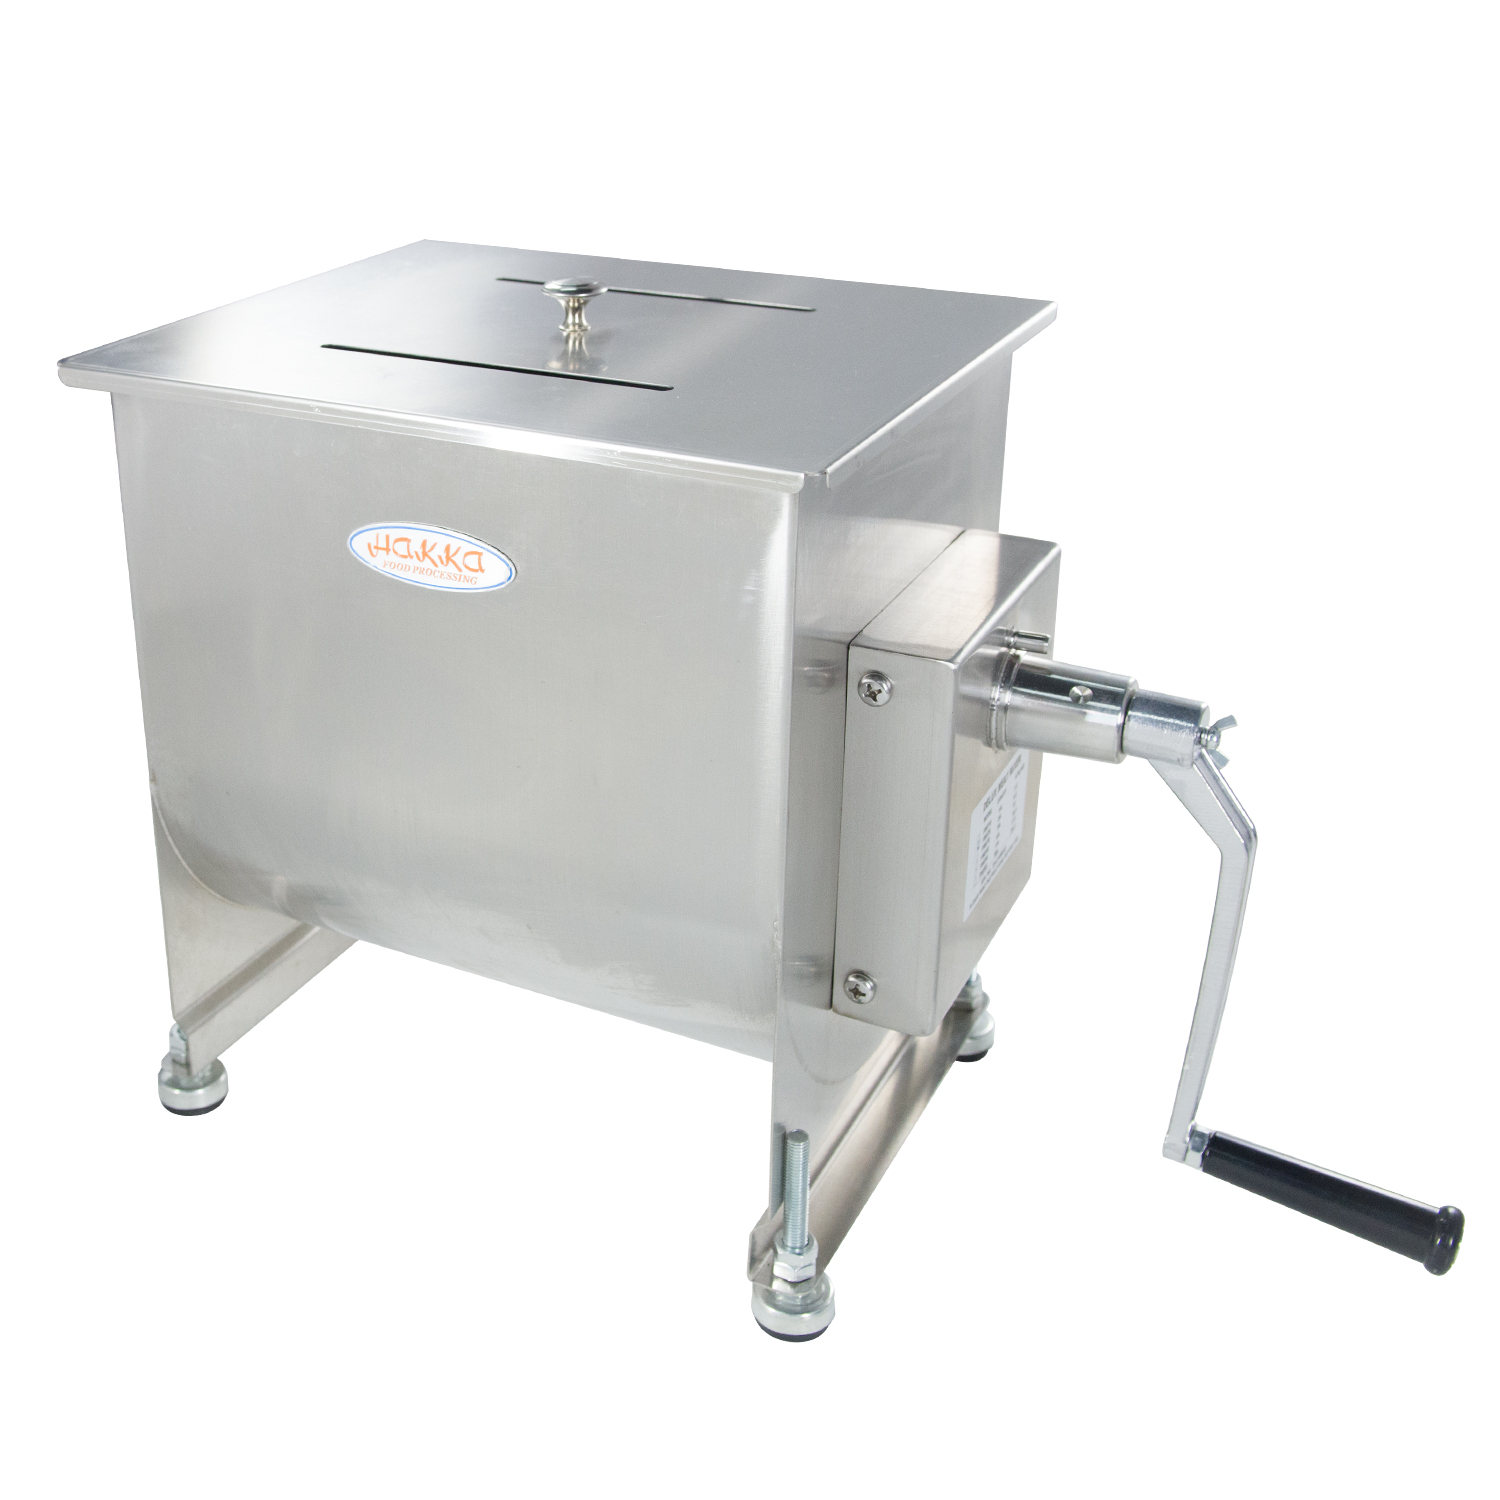 for　Mixer　Manual　Meat　Hakka?　40-Pound　Stainless　30-Pound　capacity　Tank　Maximum　Steel　(Mixing　Meat)